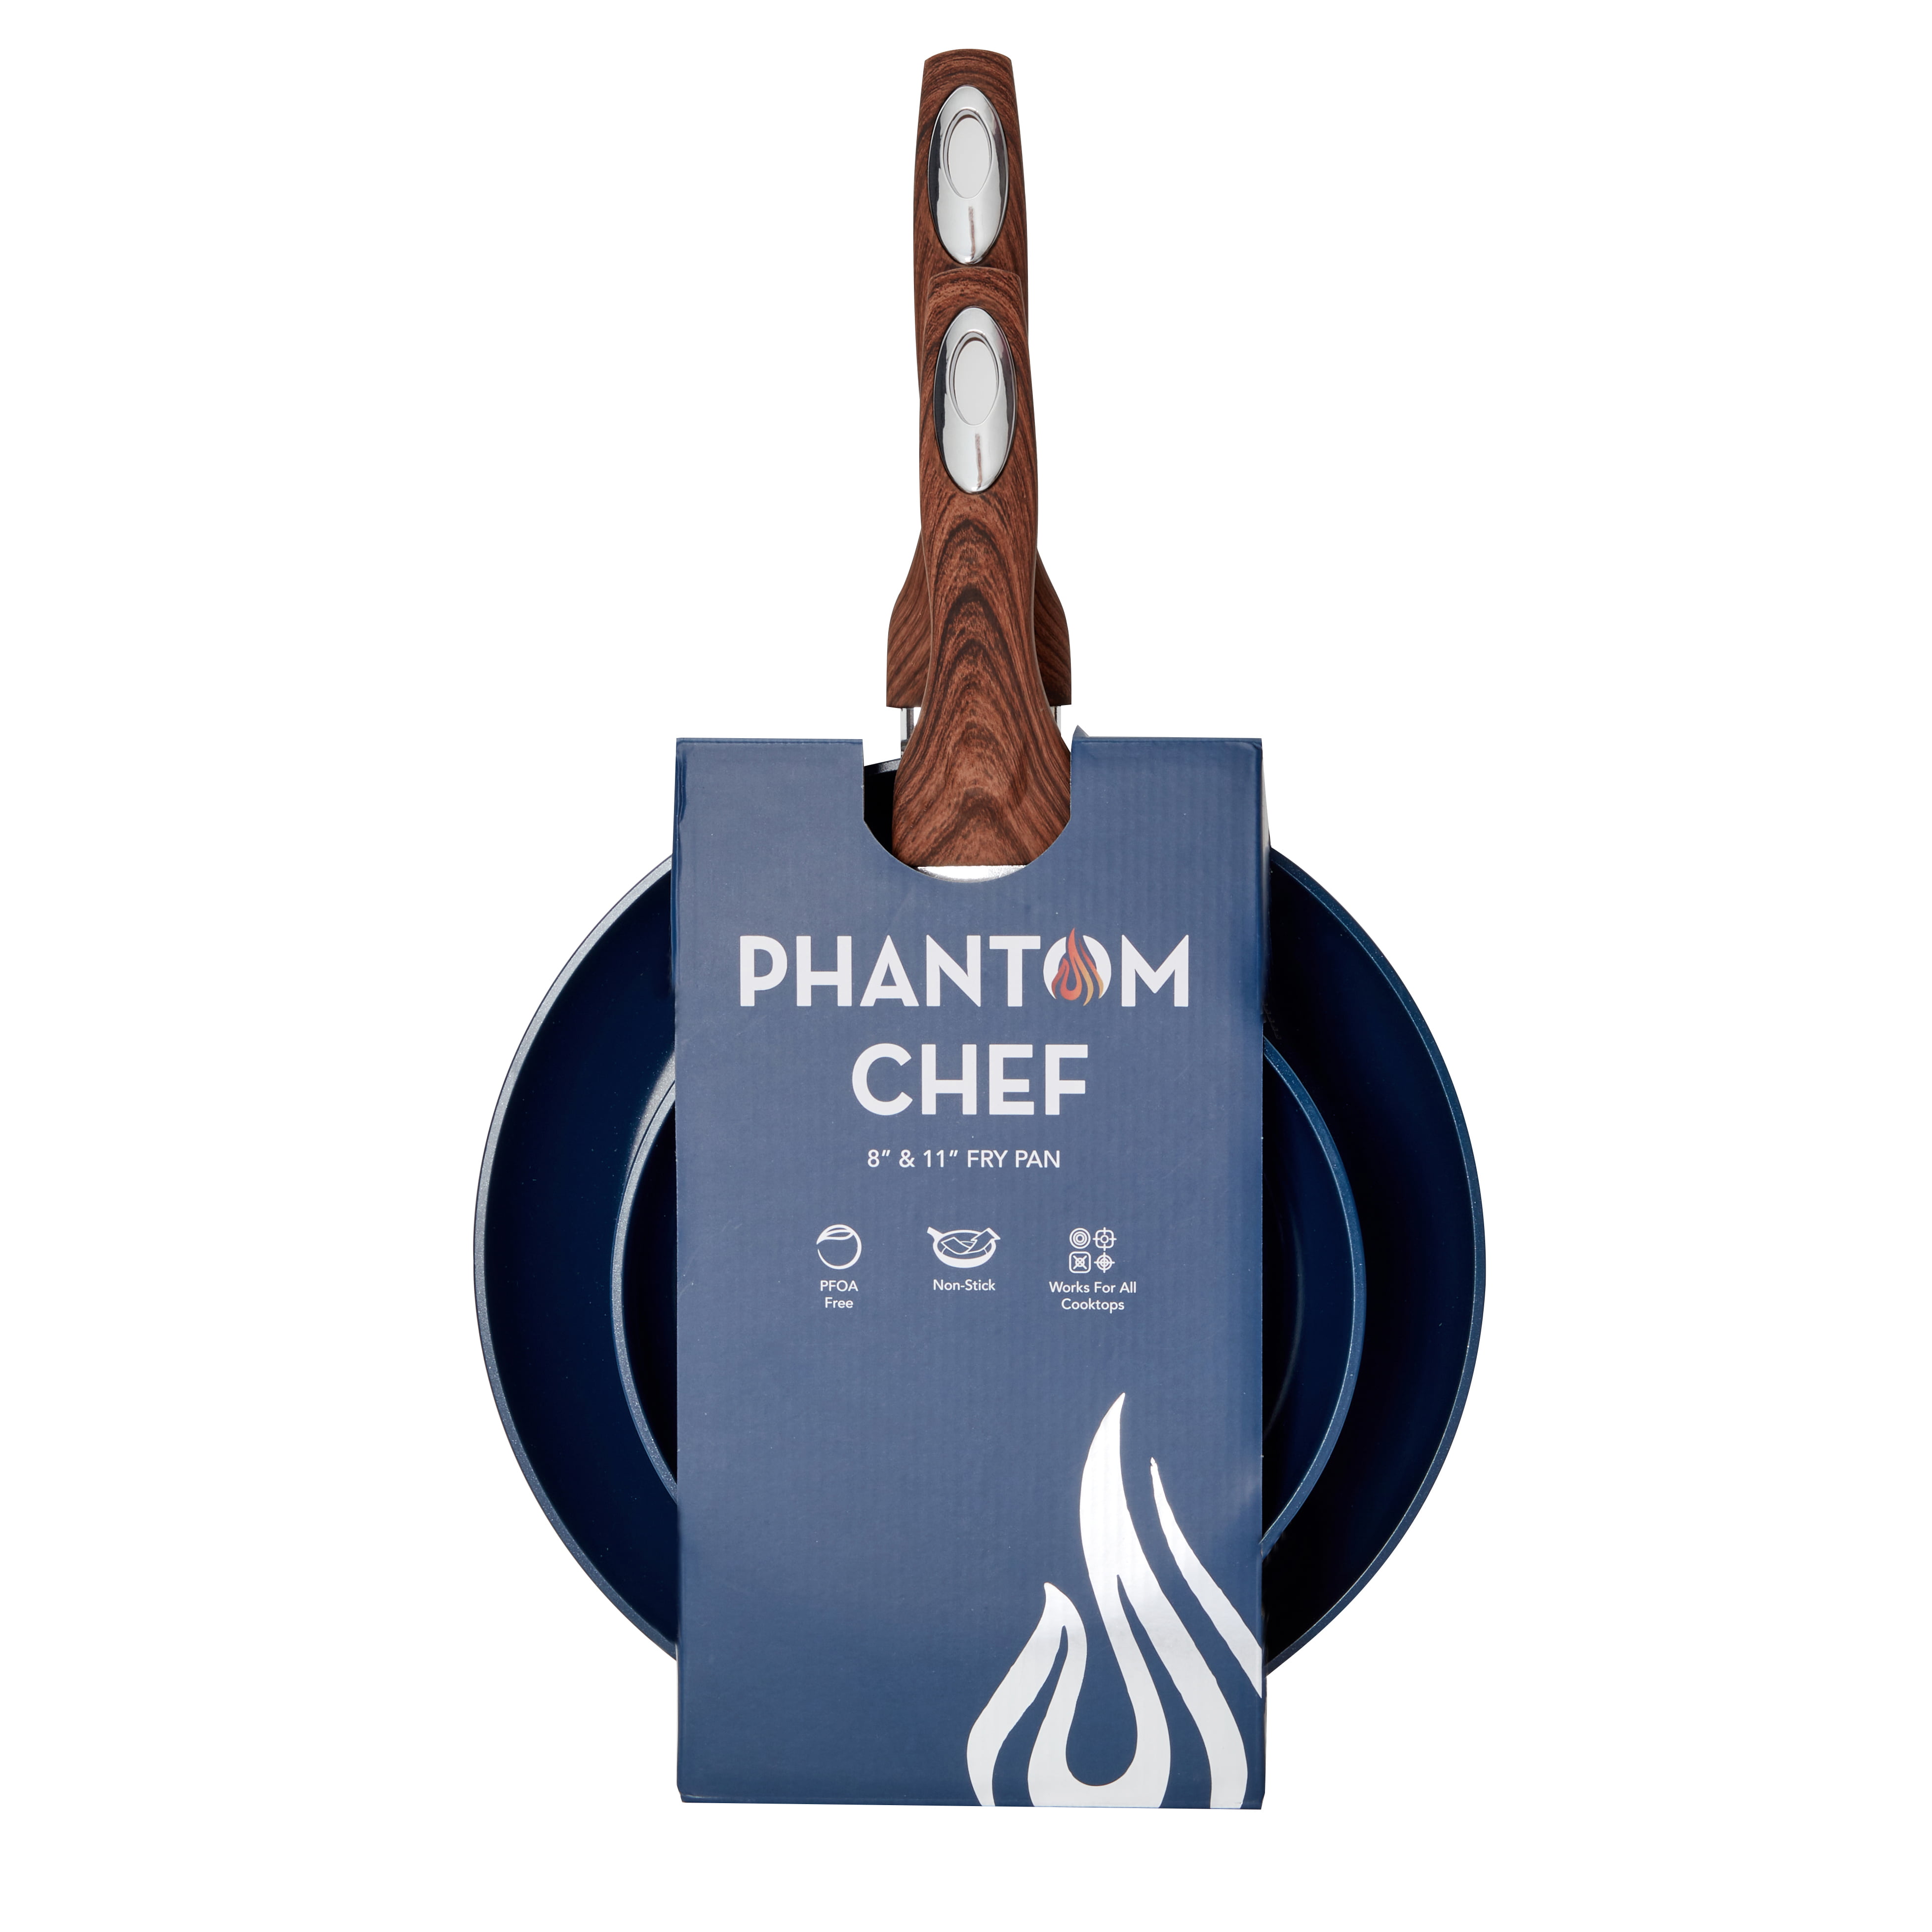 Phantom Chef 8” & 11 Frying Pan Set | Pure Aluminum Nonstick Frying Pan  Set With Easy Clean Ceramic Coating | Soft Touch Stay Cool Handle | PTFE  PFOA